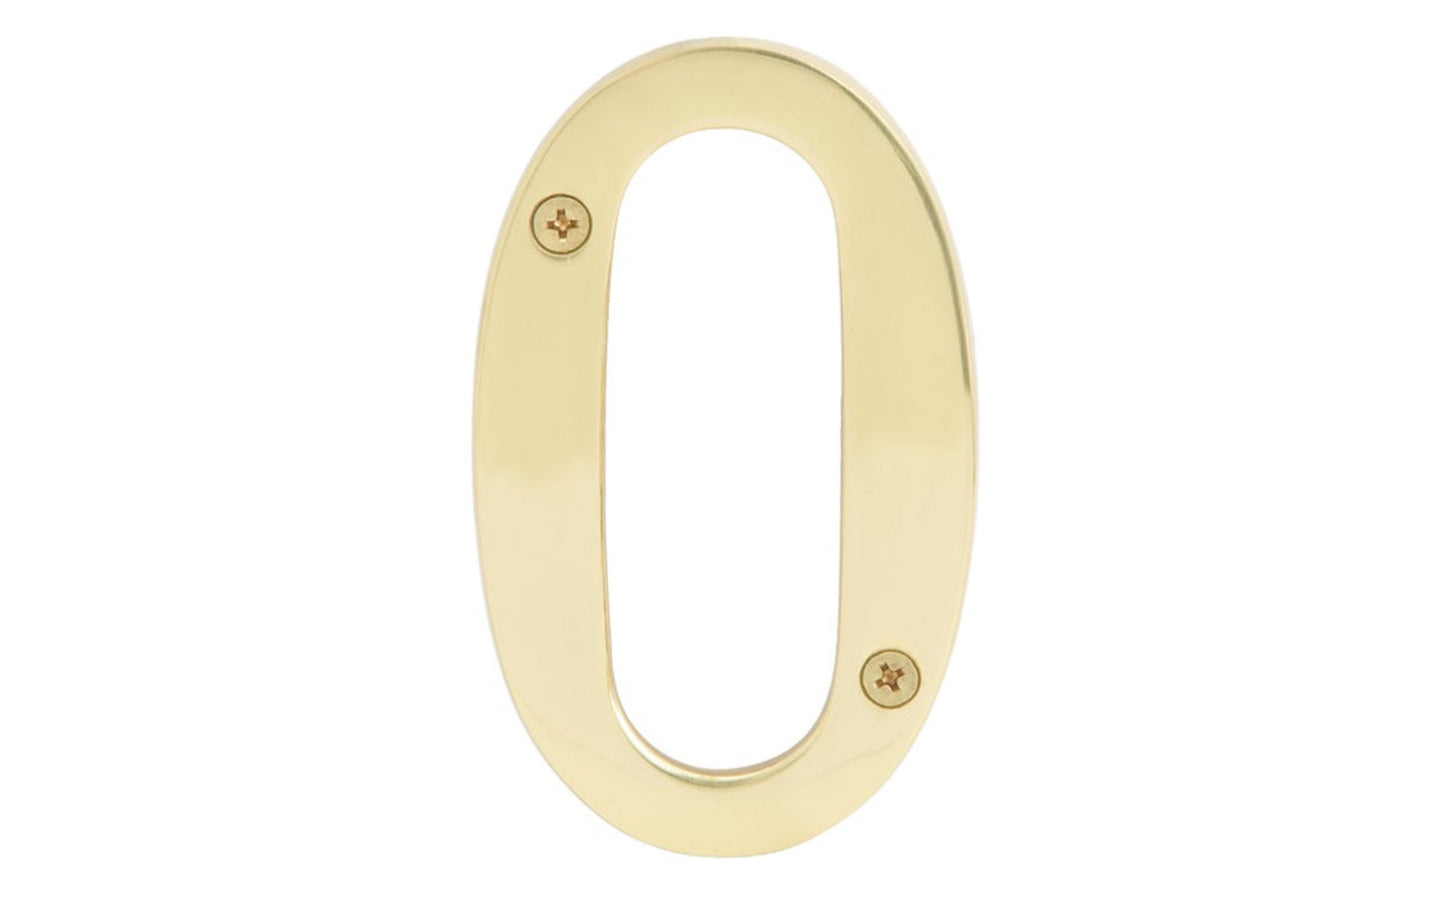 Number Zero Solid Brass House Number in a 4" Size. Made of solid brass material - 1/4" thickness. Lacquered brass finish. Includes two flat head phillips screws. #0 House Number. Hy-Ko Model No. BR-90/0. 029069104900